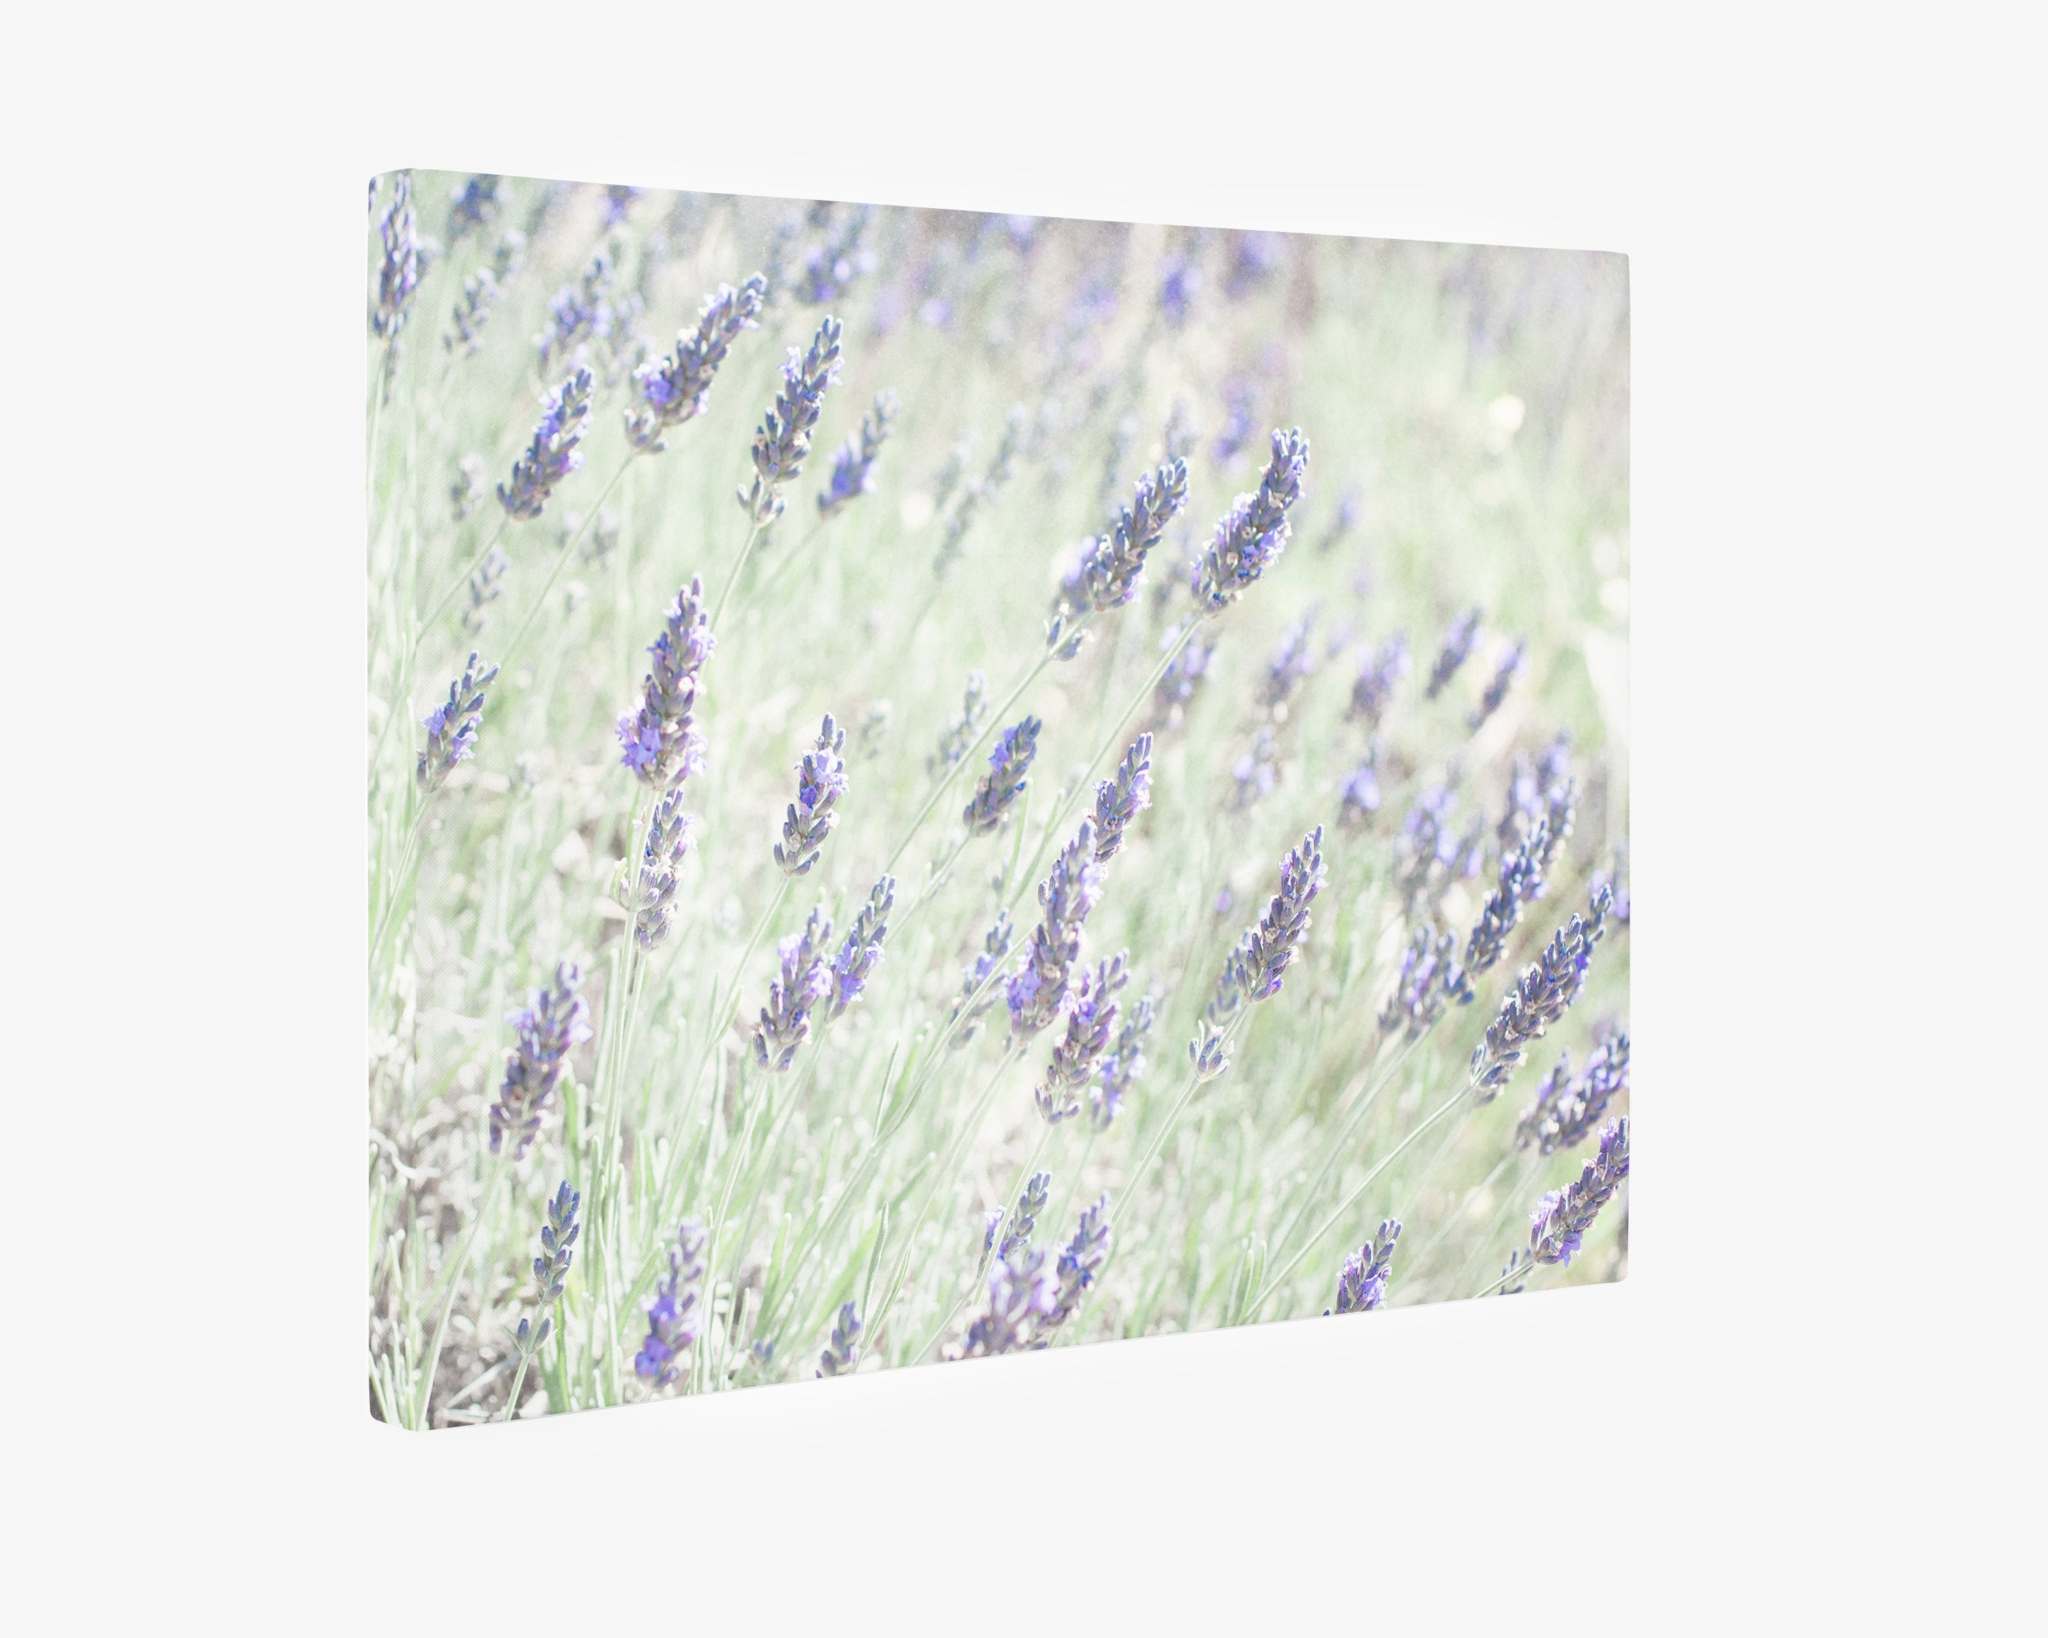 A Floral Purple Canvas Wall Art, 'Lavender for LaLa' by Offley Green depicting a field of lavender flowers in soft focus. The lavender stalks, adorned with purple blooms, sway gently amidst a backdrop of light green grasses, creating a calming, airy scene. This pastel-toned living room decor piece enhances the tranquil ambiance.